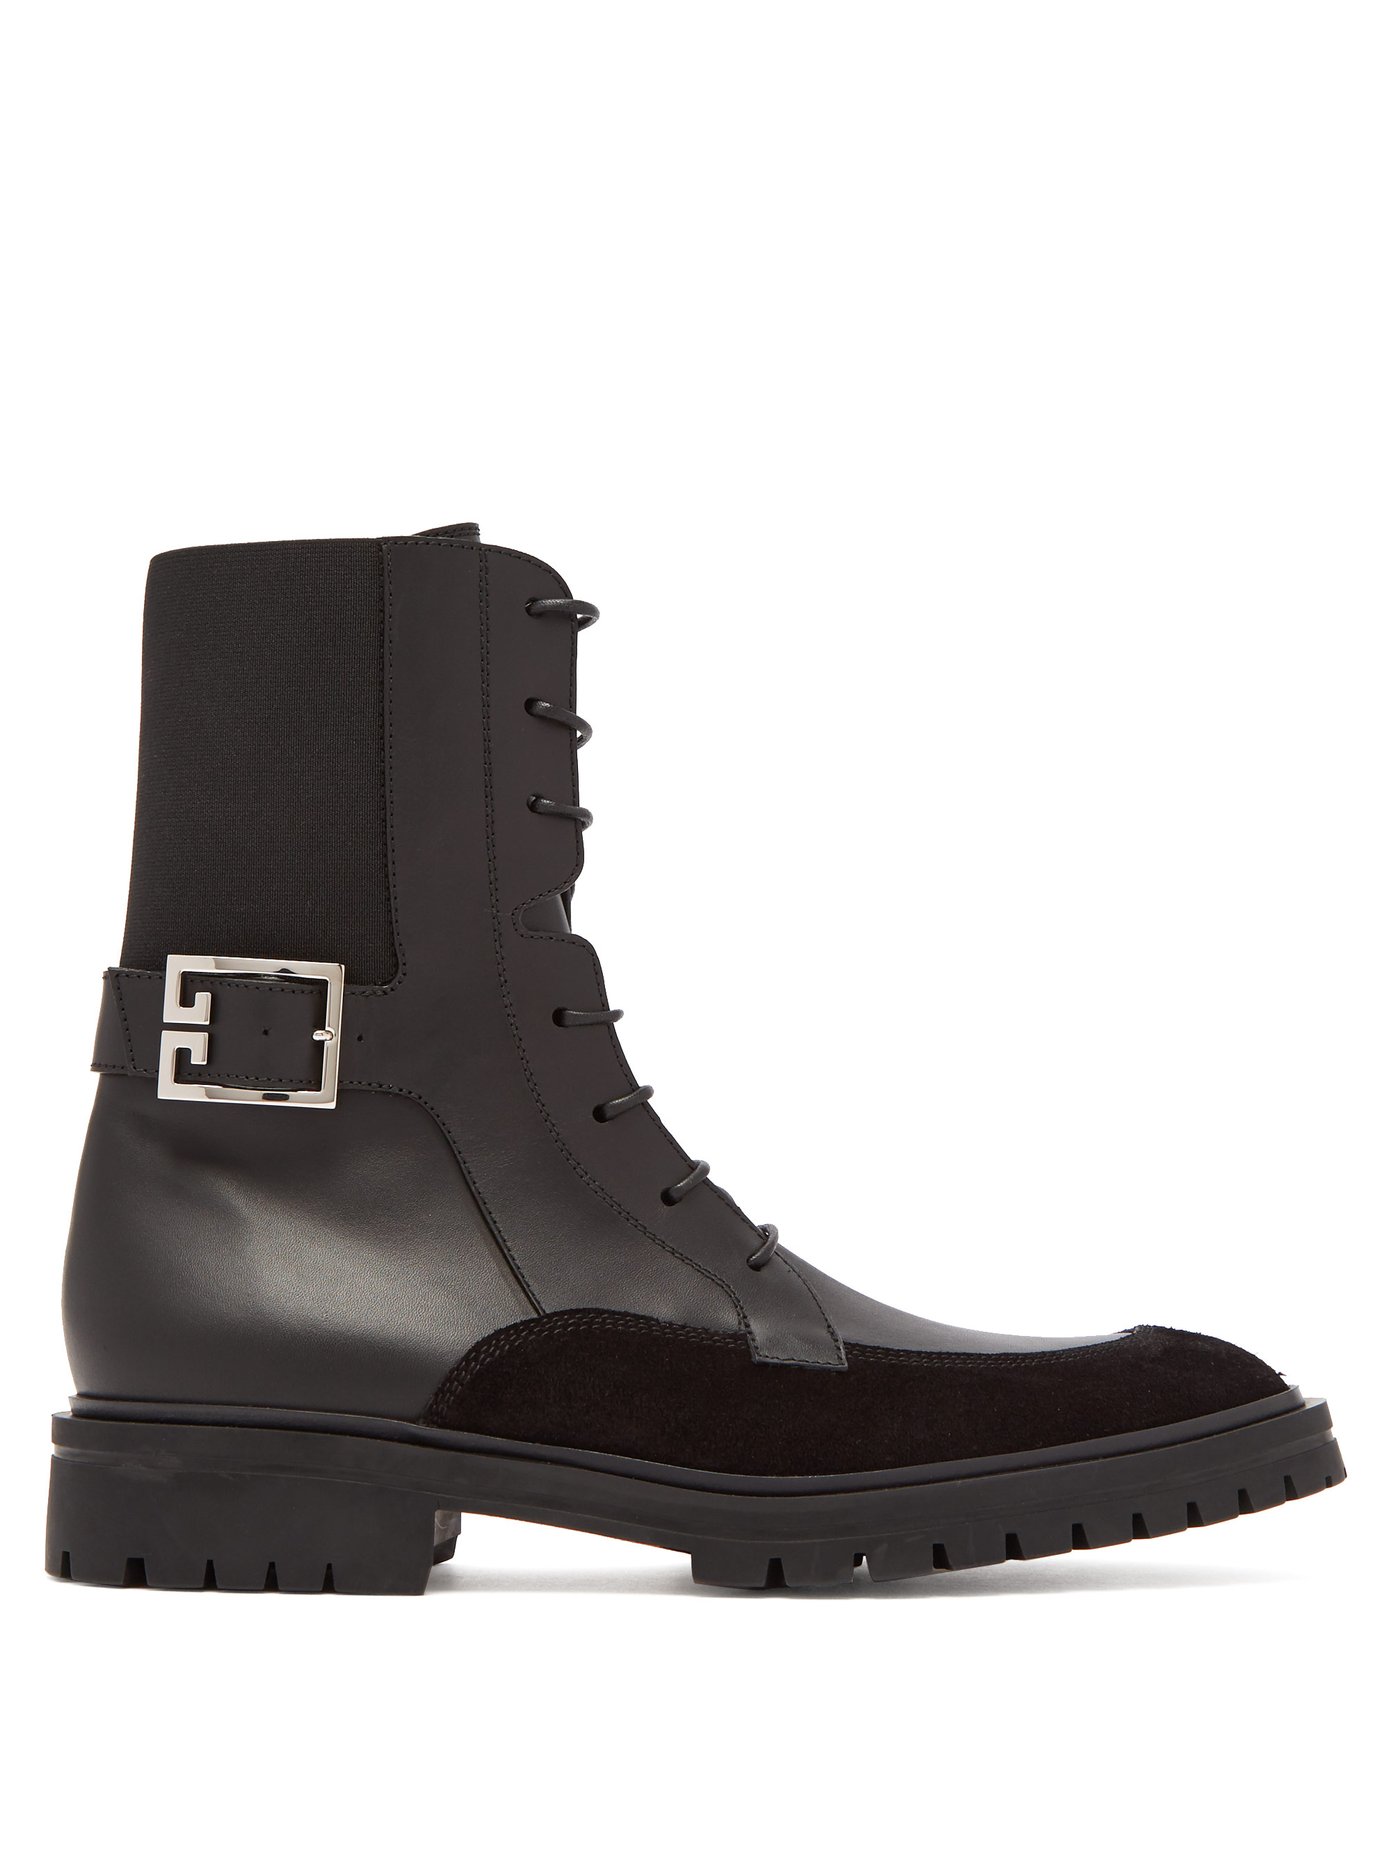 givenchy black boots